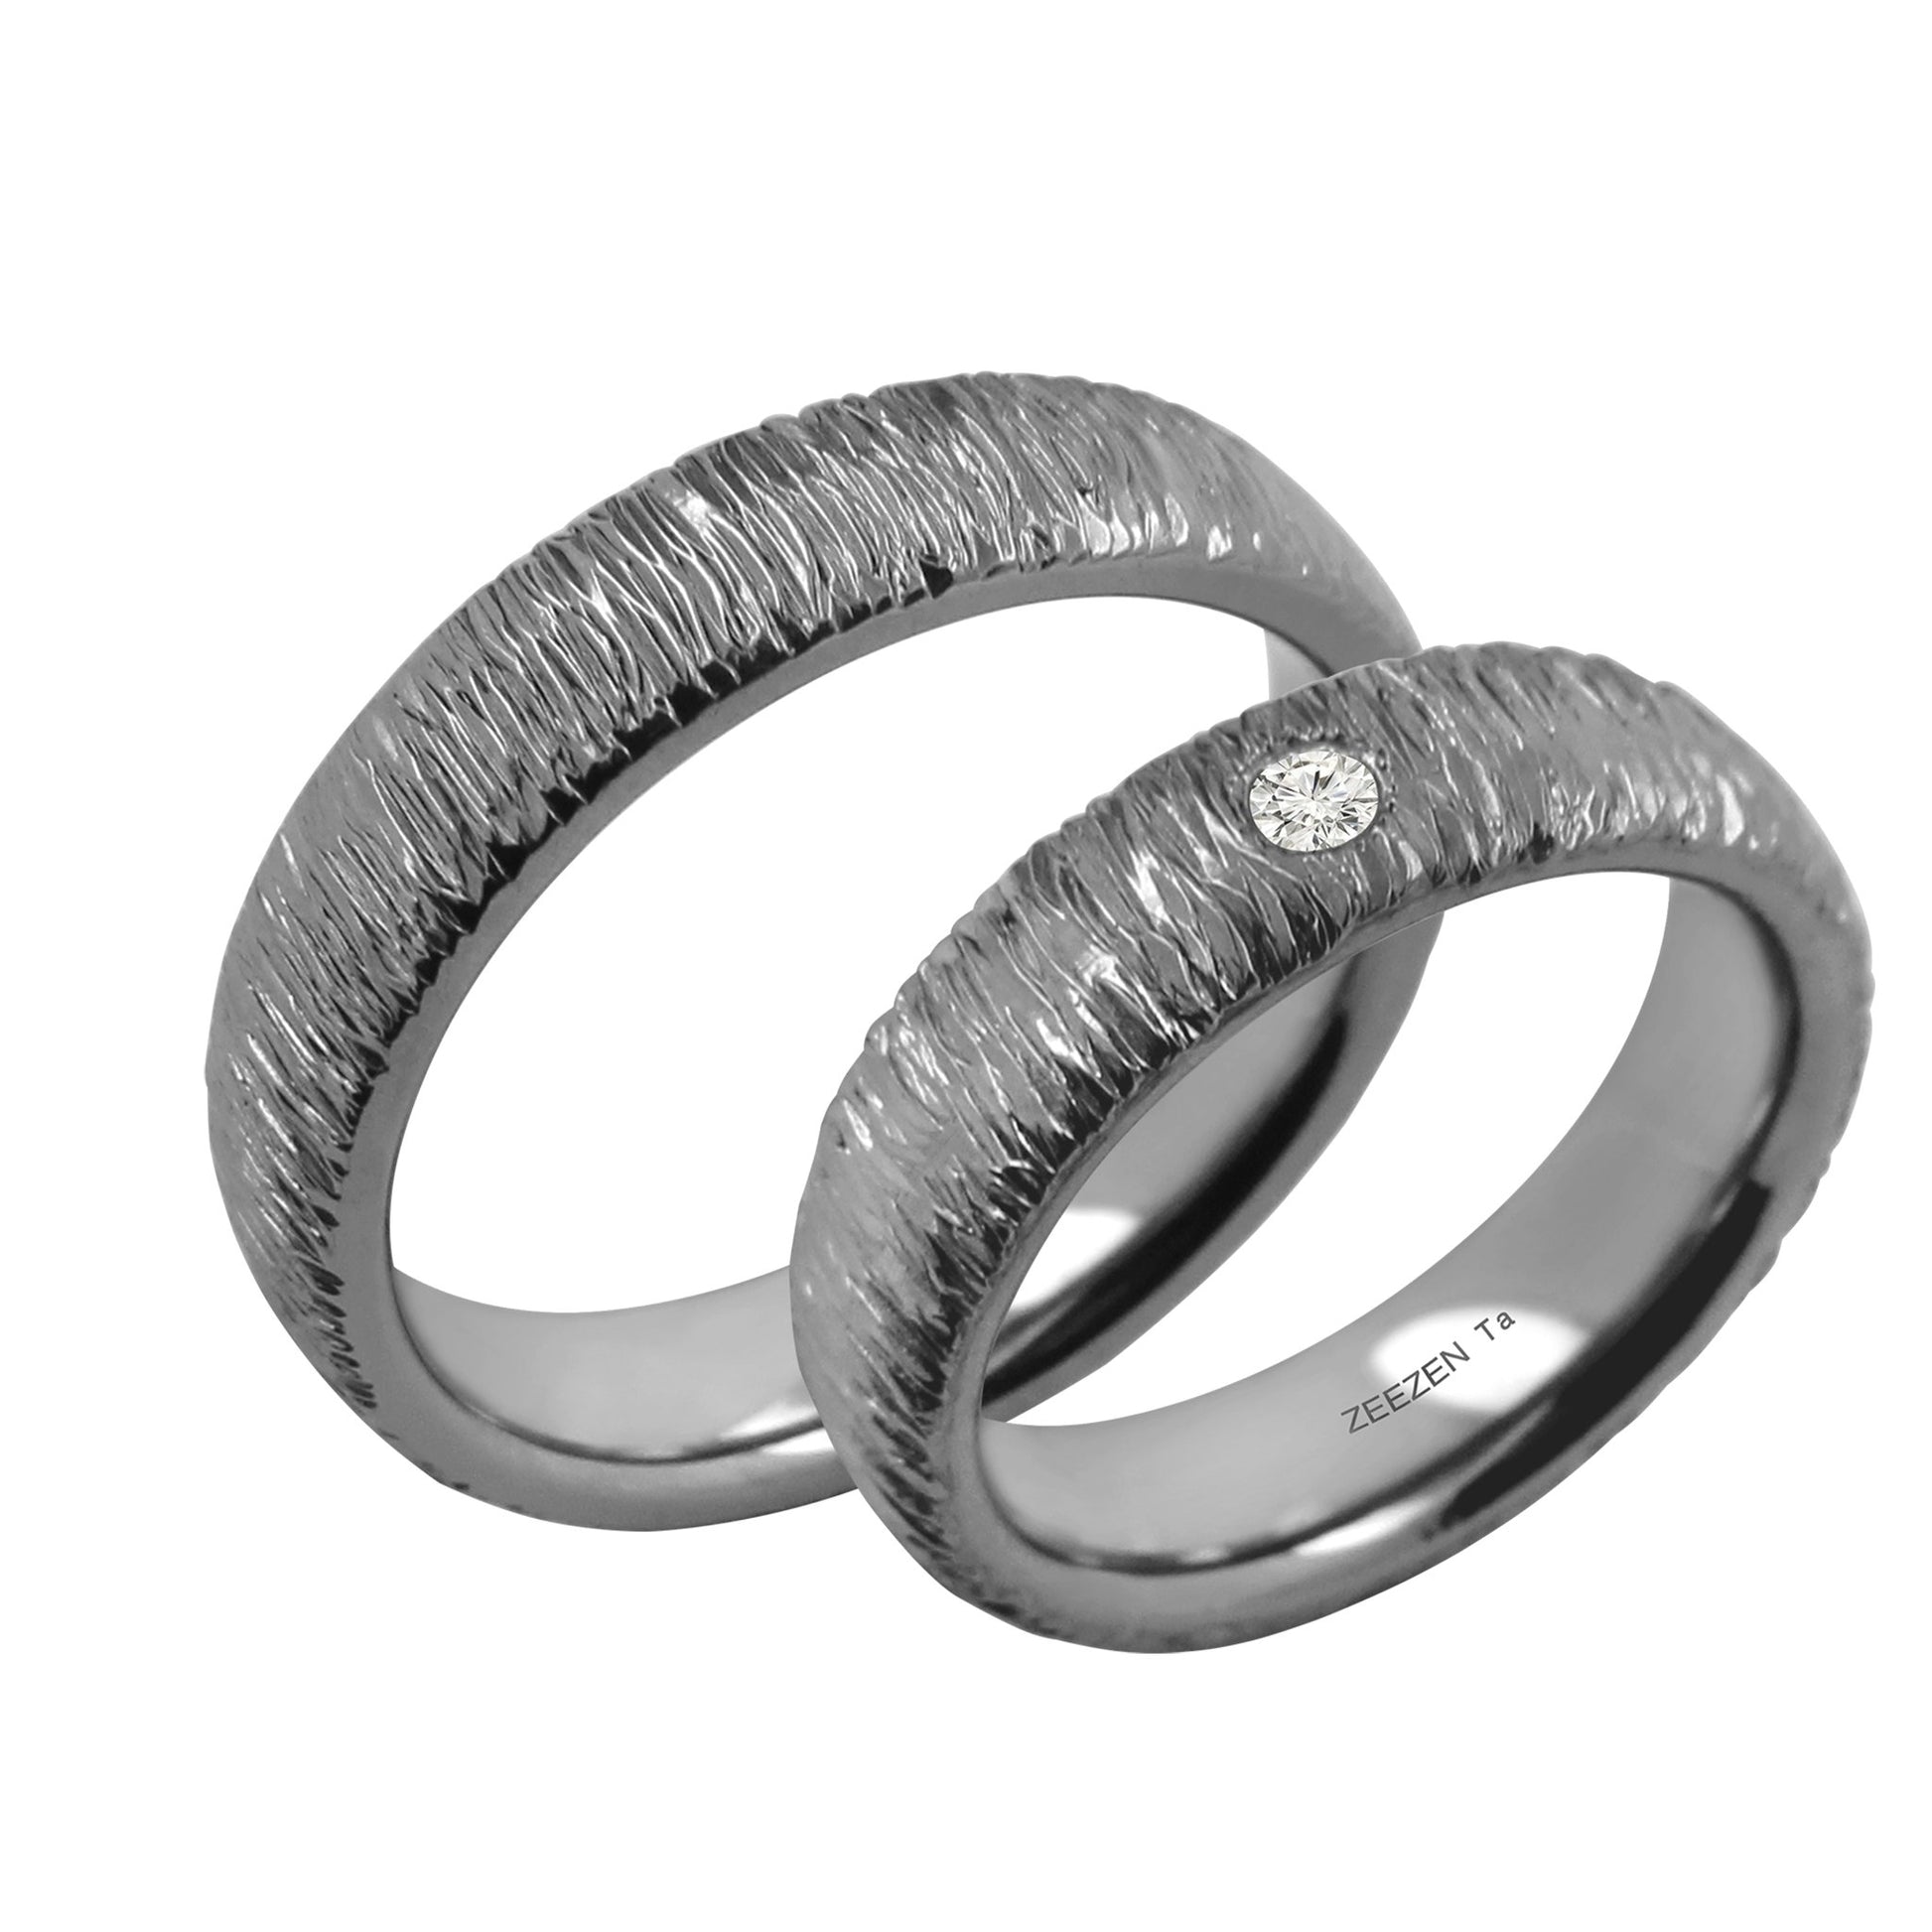 Tantalum Ring w/o min. Corner Hammered Polished w/ Small Ruffle Pattern. Ring profile: width: 5.5 mm || height: 2.3 mm. Next to a matching couple ring with a lab grown diamond.